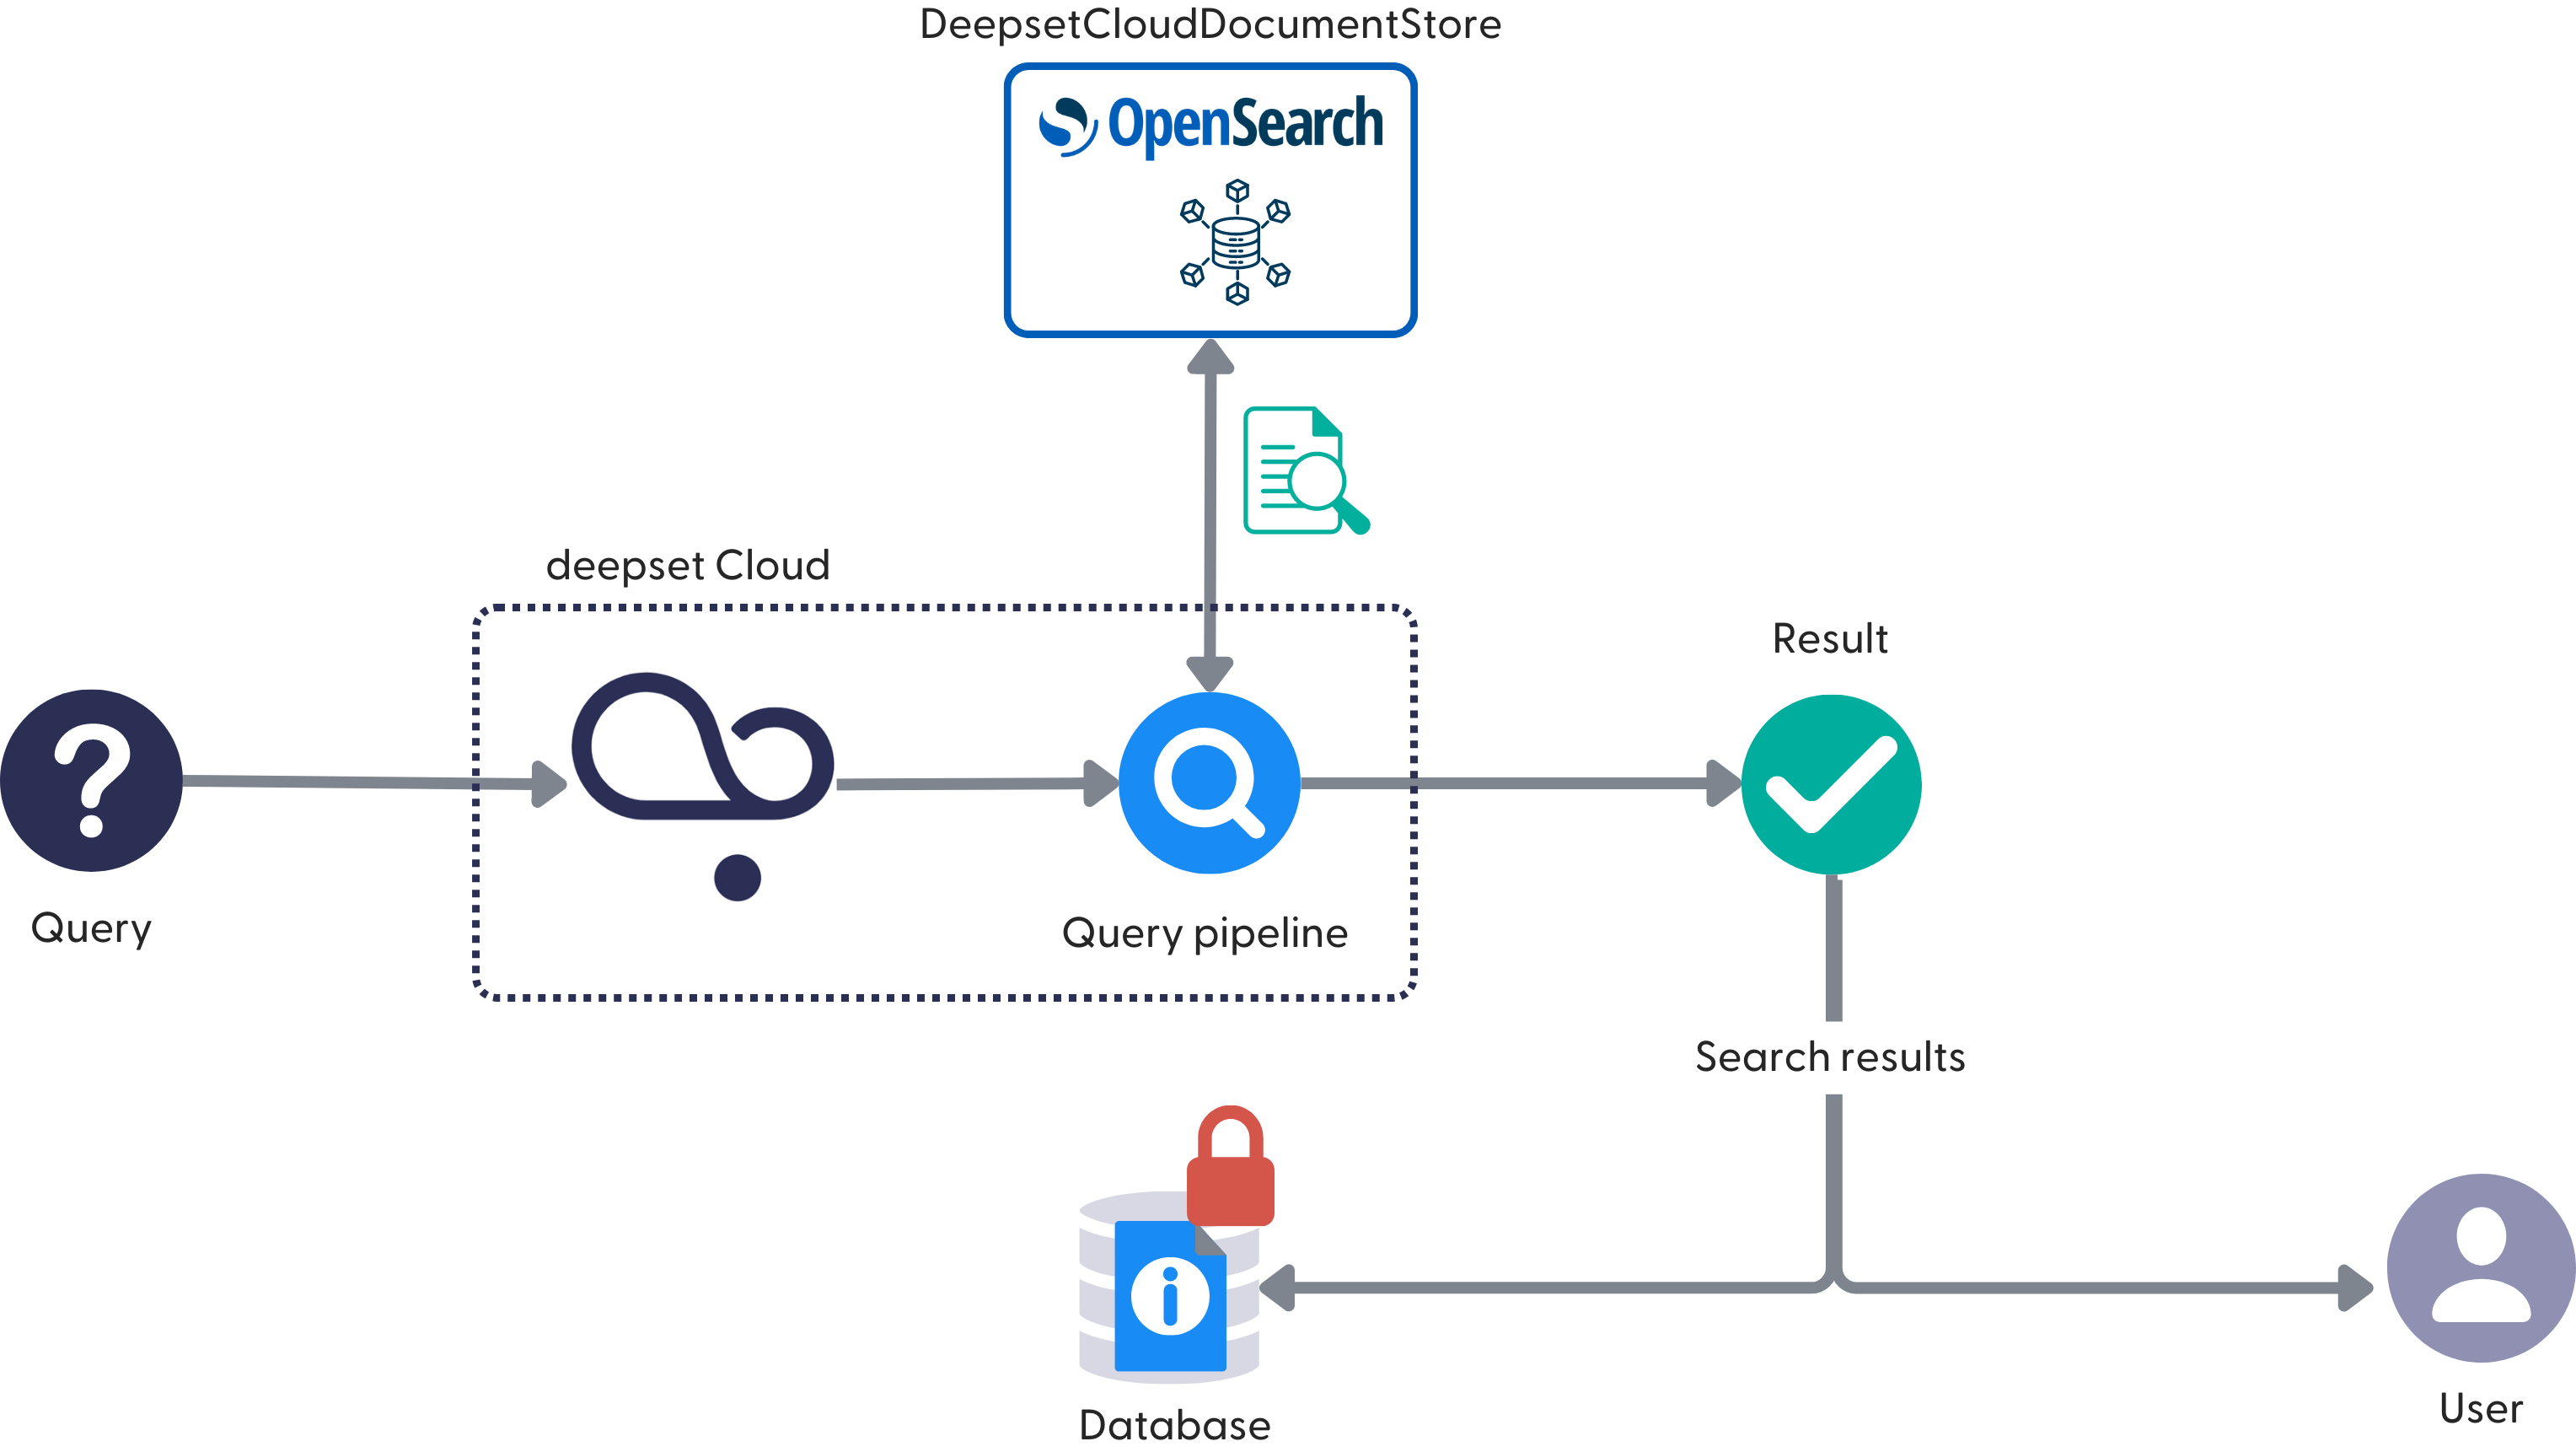 A question marked illustrating a query with an arrow going from it towards the deepset Cloud logo. The deepset Cloud logo has an arrow going towards a magnifying glass icon depiciting the search pipeline. From the search pipeline icon, there's a bidirectional arrow going towards the OpenSearch logo. Then, there's another arrow from the search pipeline towards a green tick icon depicting the search result. The search result further goes towards the database icon and a user icon.